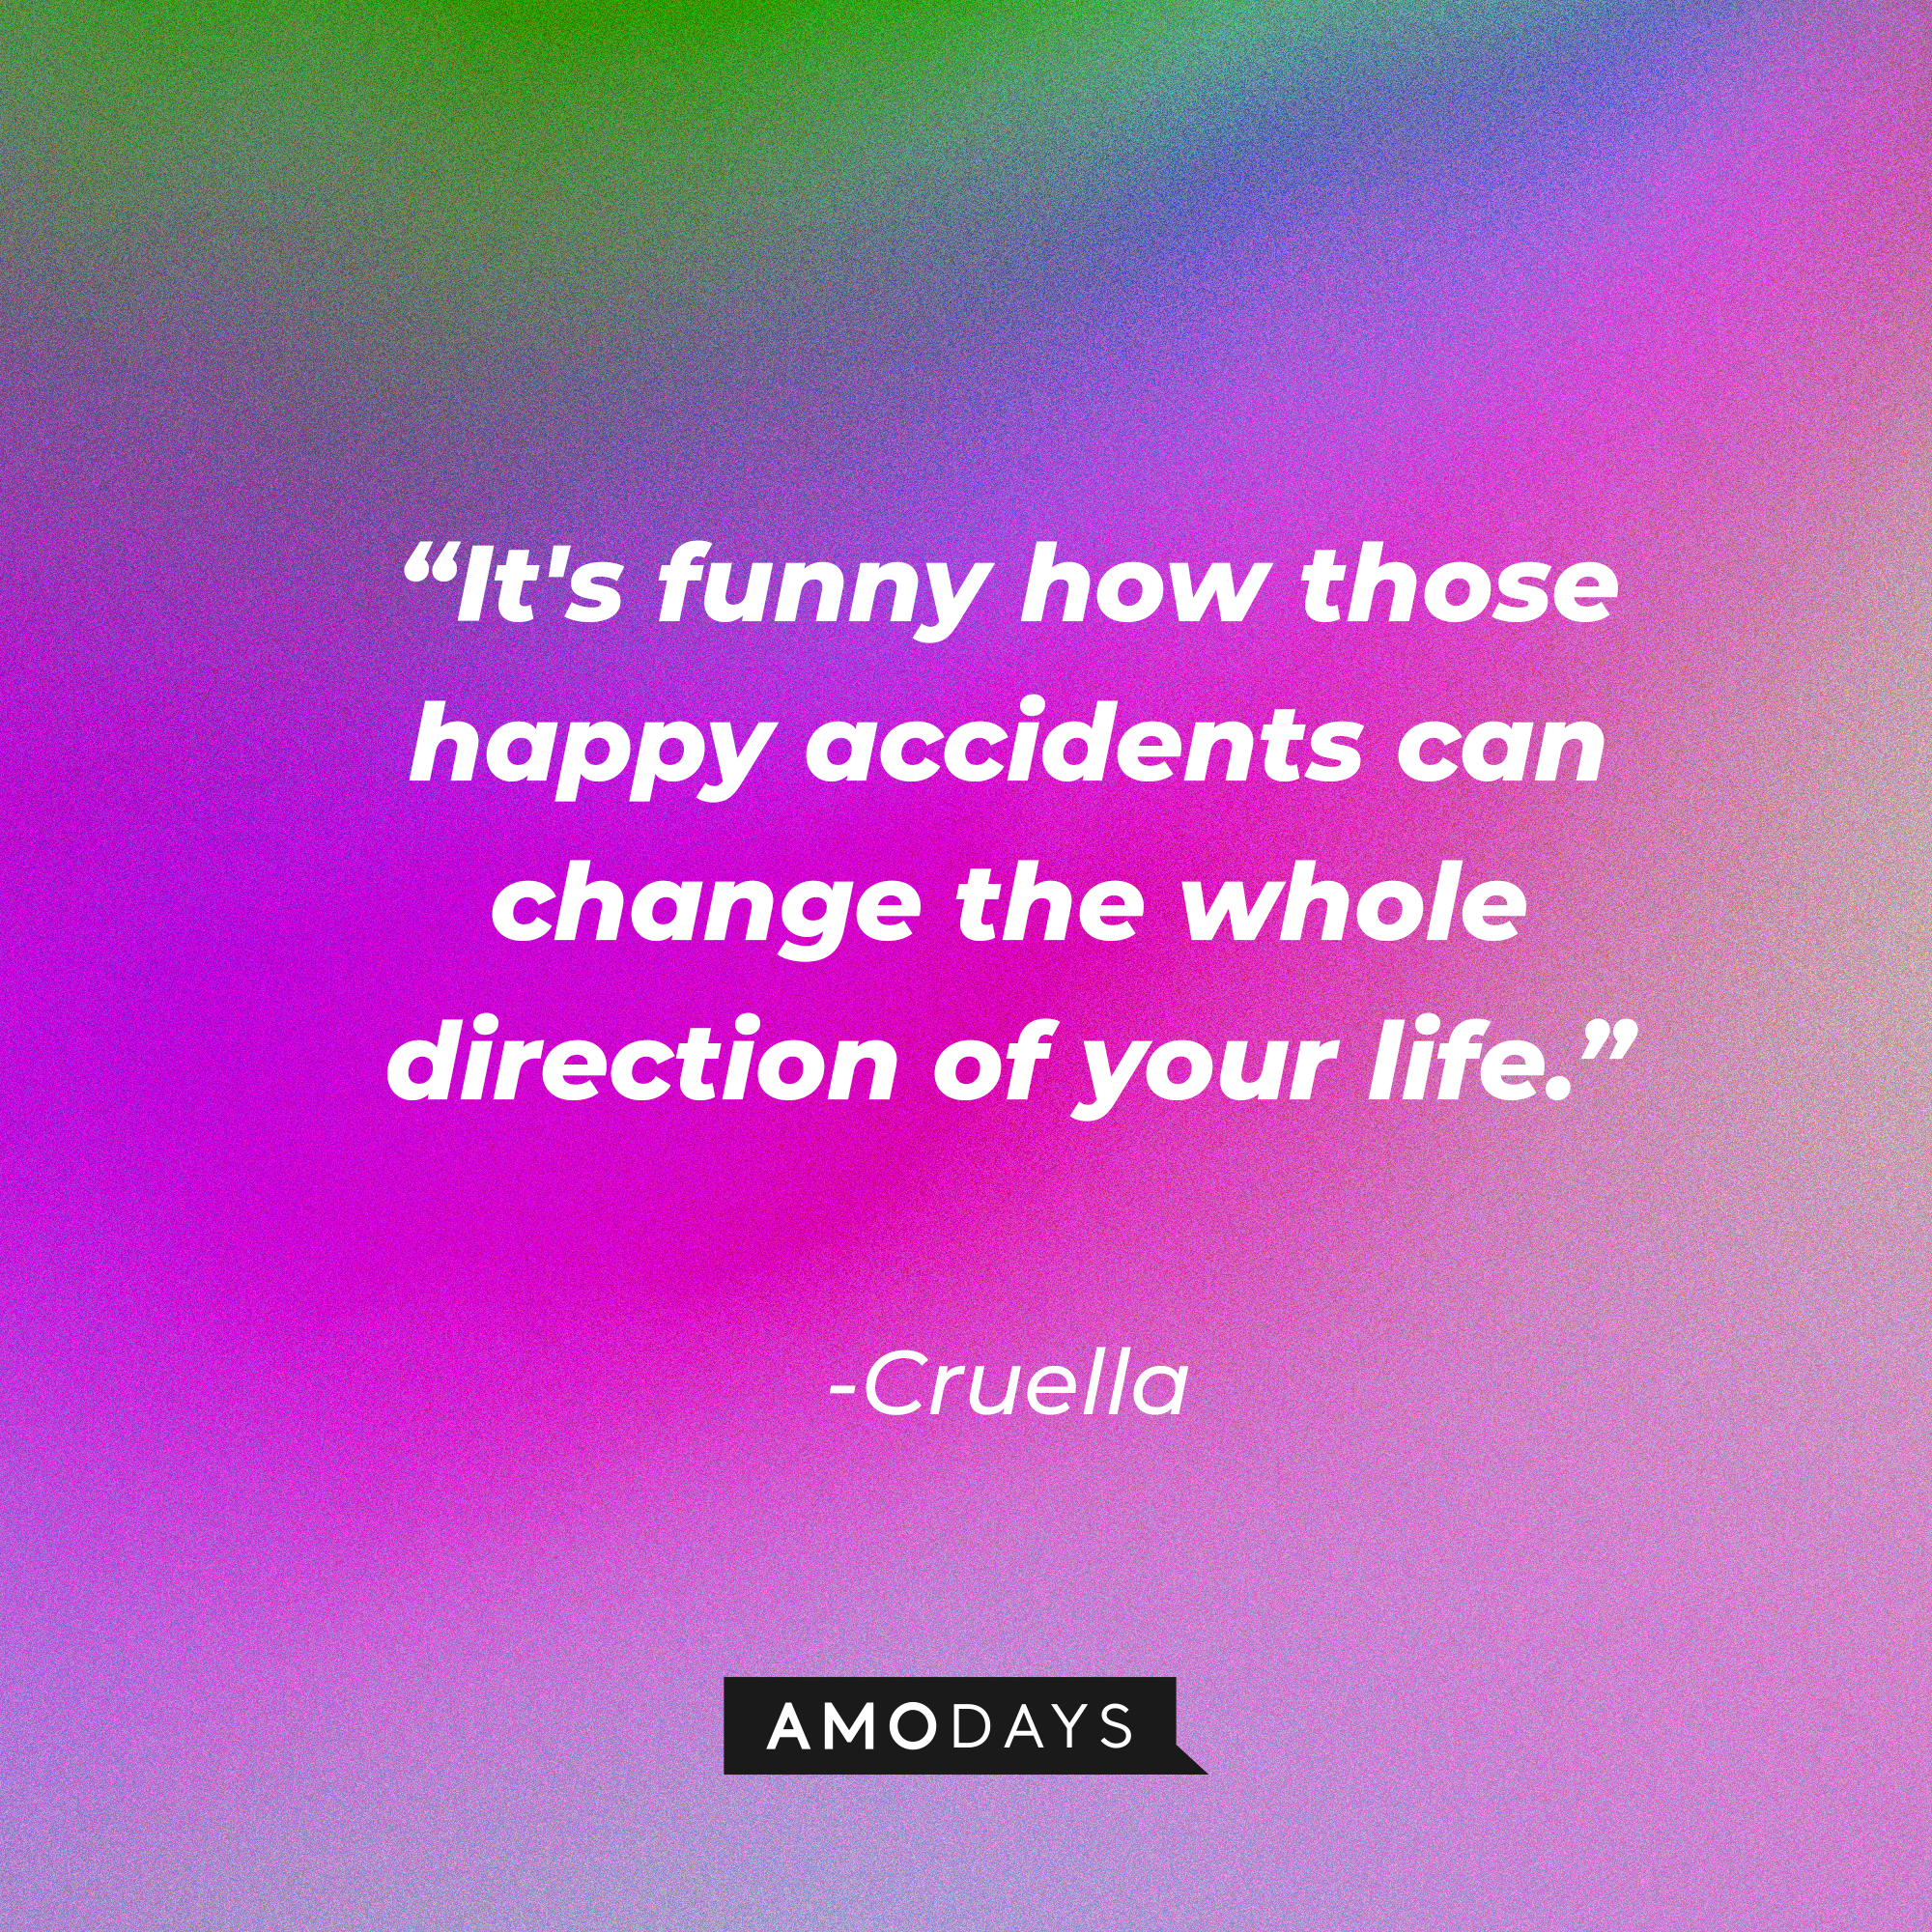 Cruella's quote: “It's funny how those happy accidents can change the whole direction of your life.” | Source: Amodays